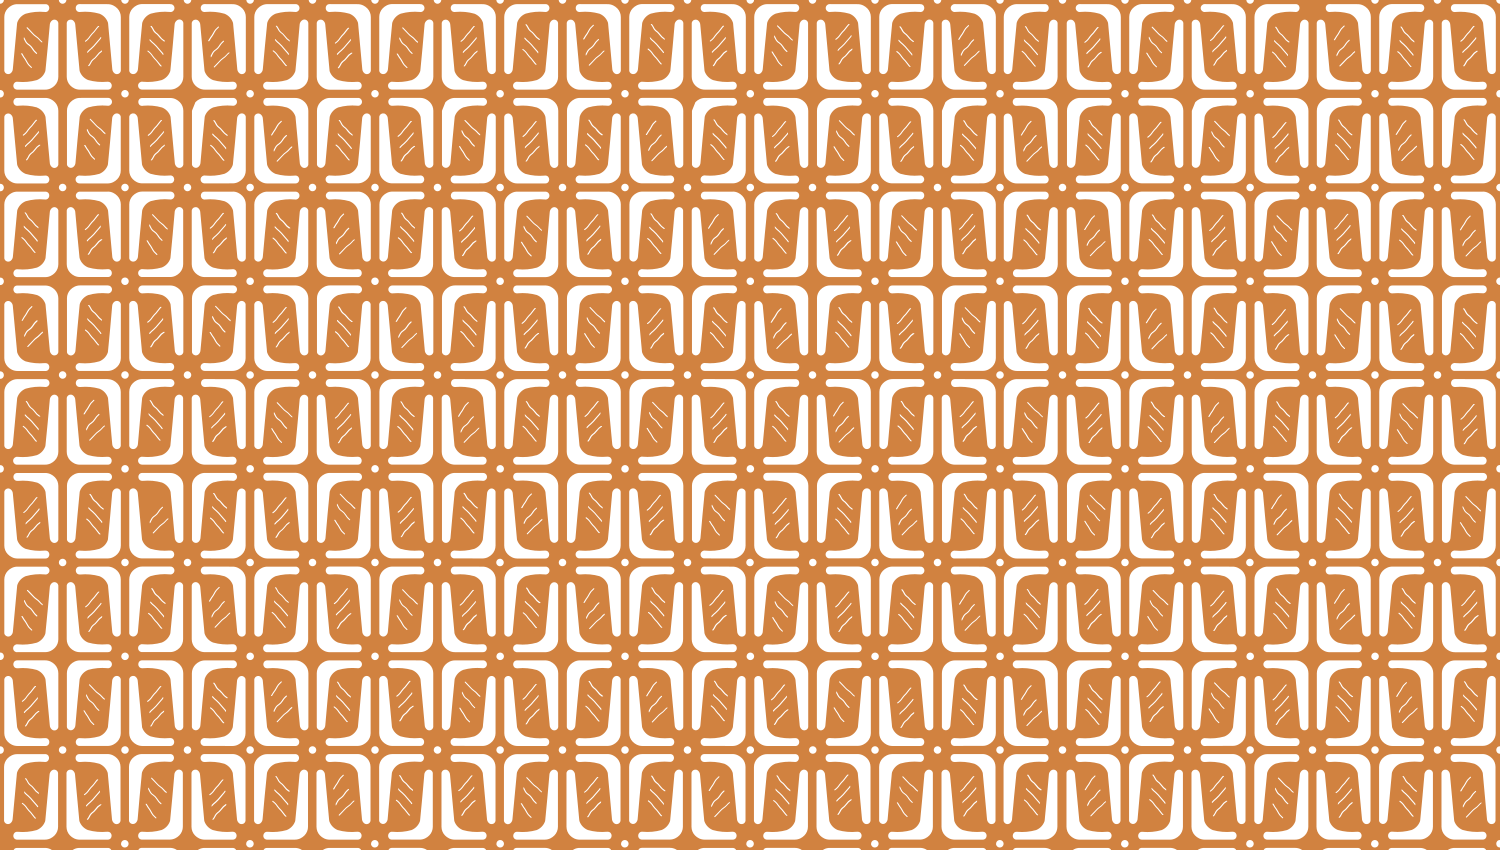 Parasoleil™ Kenyan© pattern displayed with a ochre color overlay